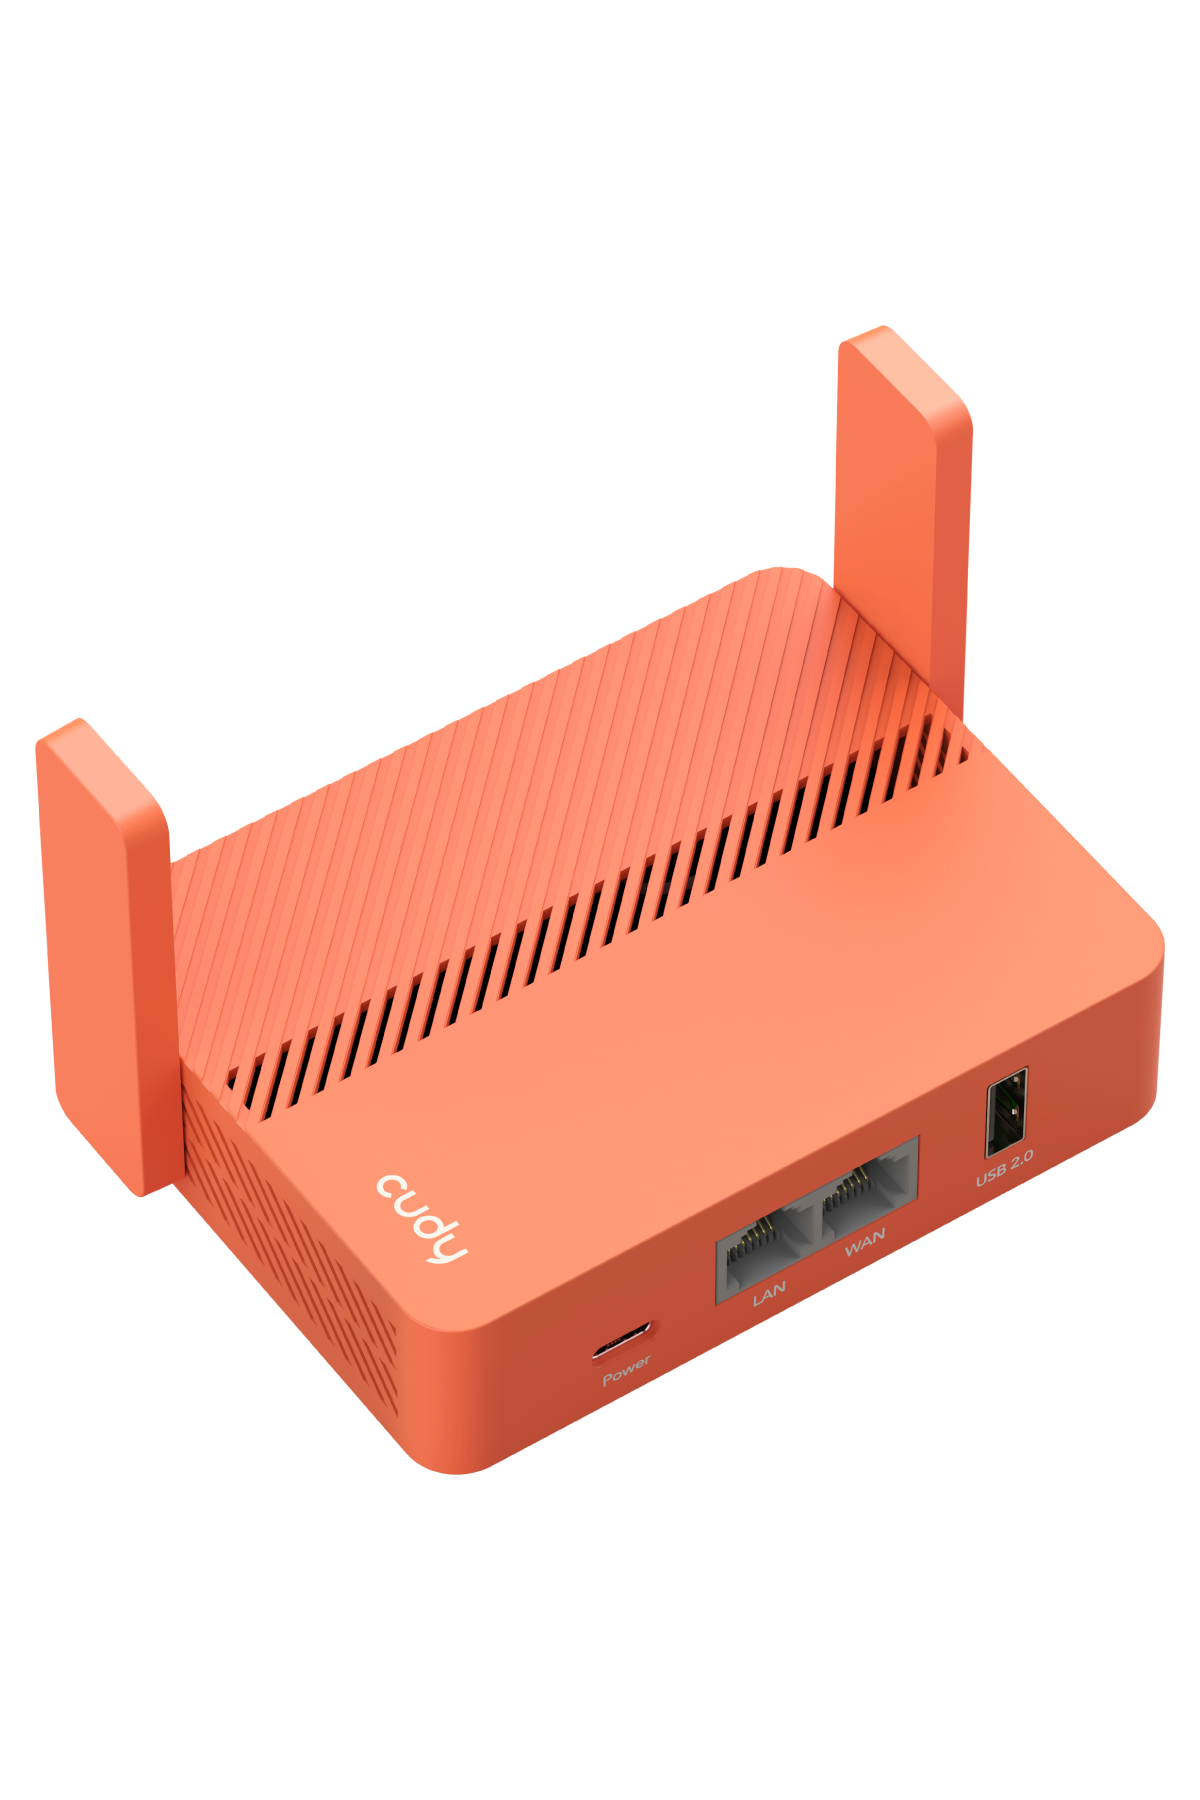 AC1200 Wi-Fi Travel Router, Model: TR1200